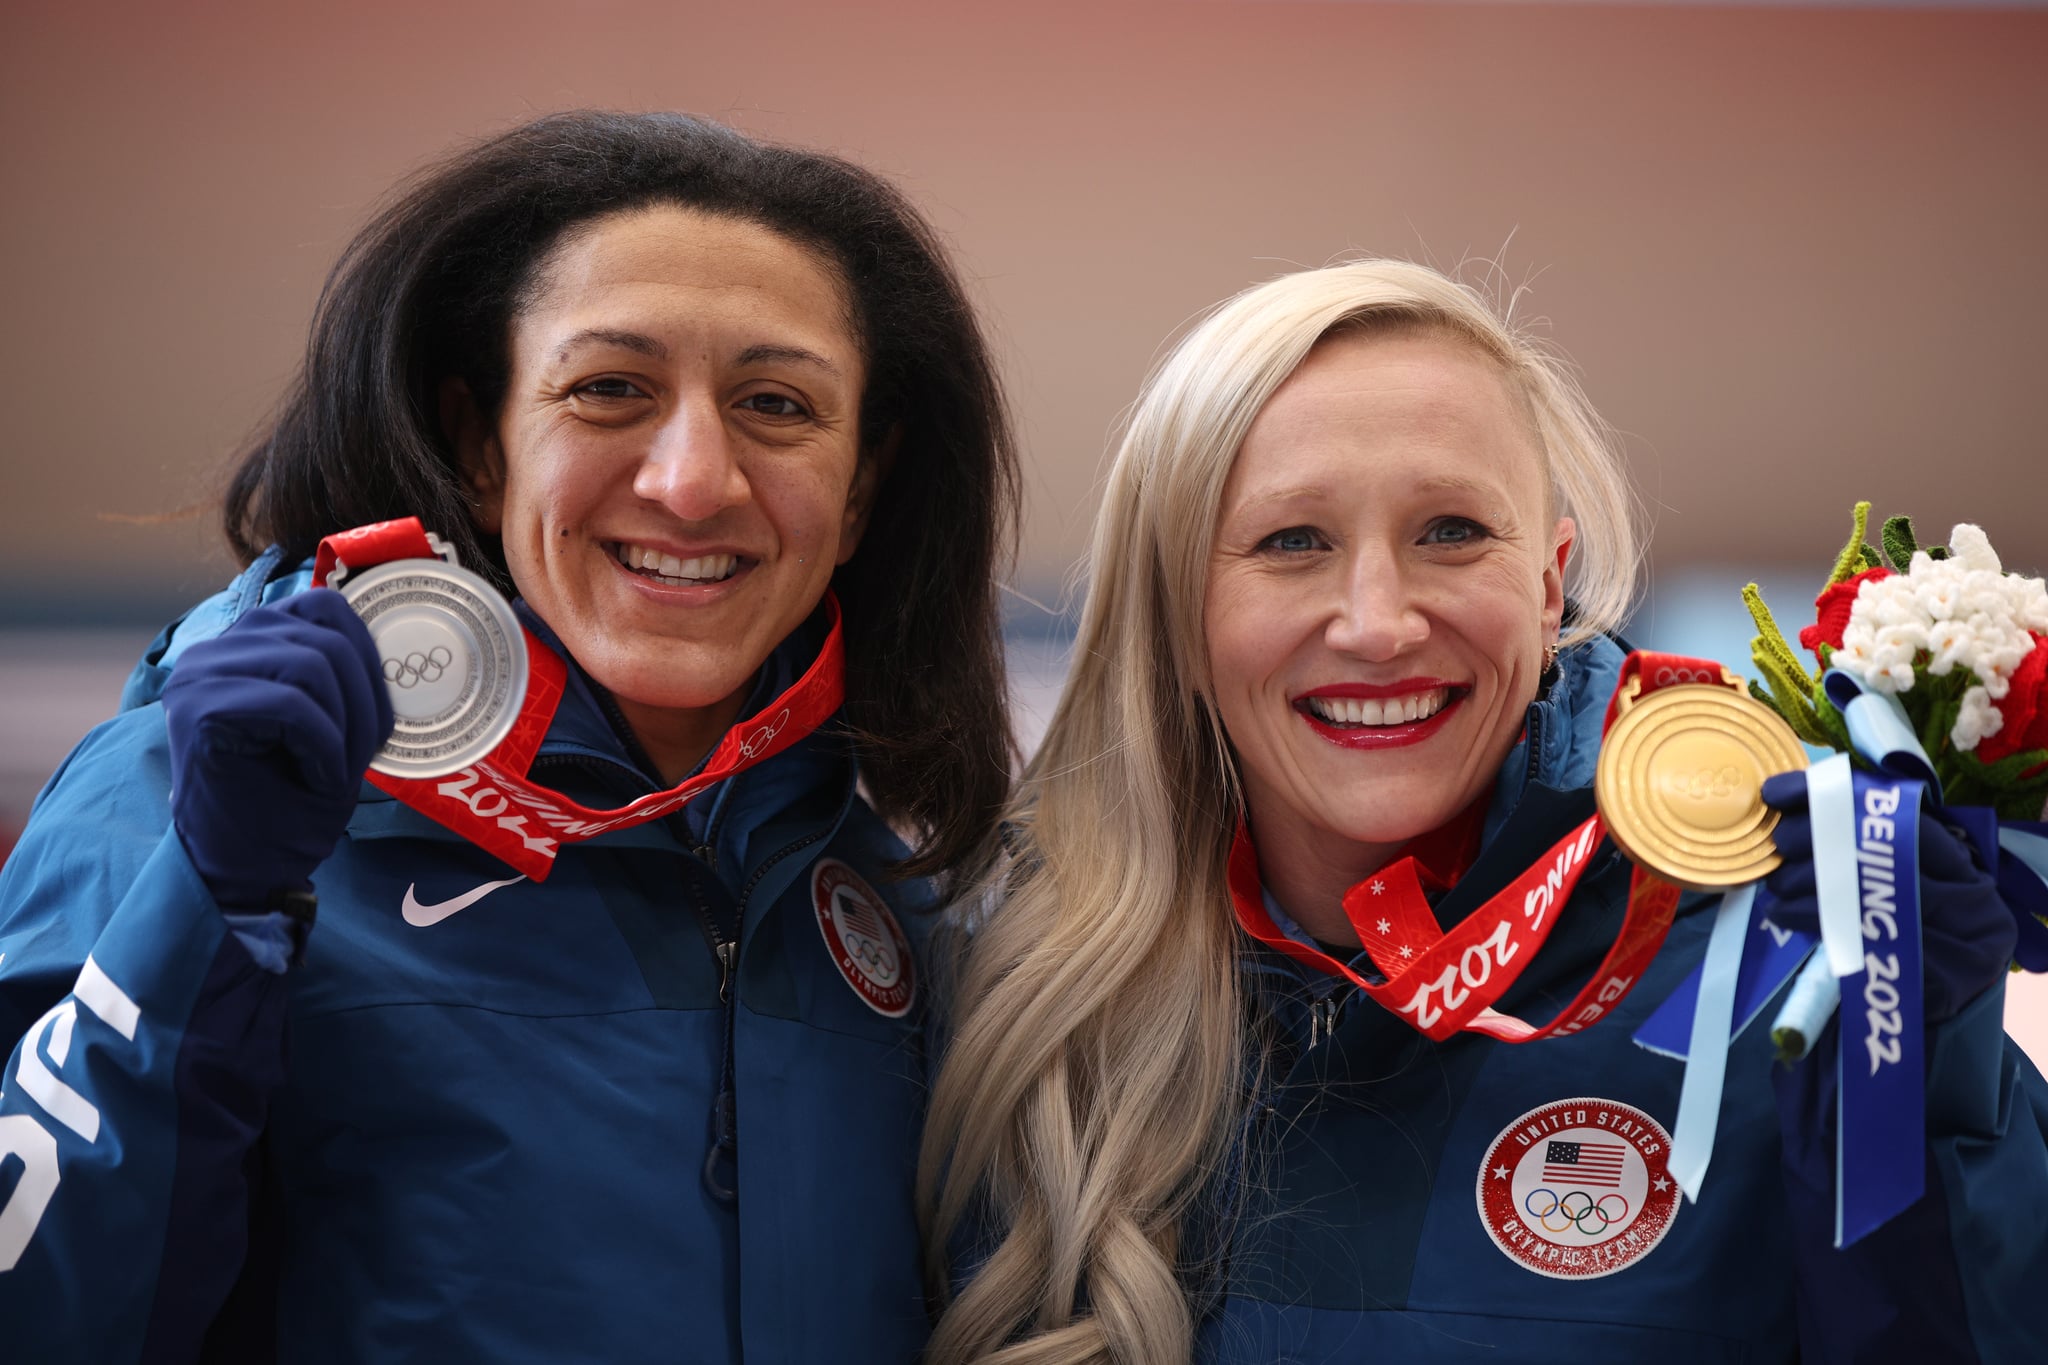 YANQING, CHINA - FEBRUARY 14: (LR) Silver medallist Elana Meyers Taylor of Team United States and Gold medallist Kaillie Humphries of Team United States celebrate during the Women's Monobob medal ceremony on day 10 of Beijing 2022 Winter Olympic Games at National Sliding Center on February 14, 2022 in Yanqing, China.  (Photo by Adam Pretty/Getty Images)